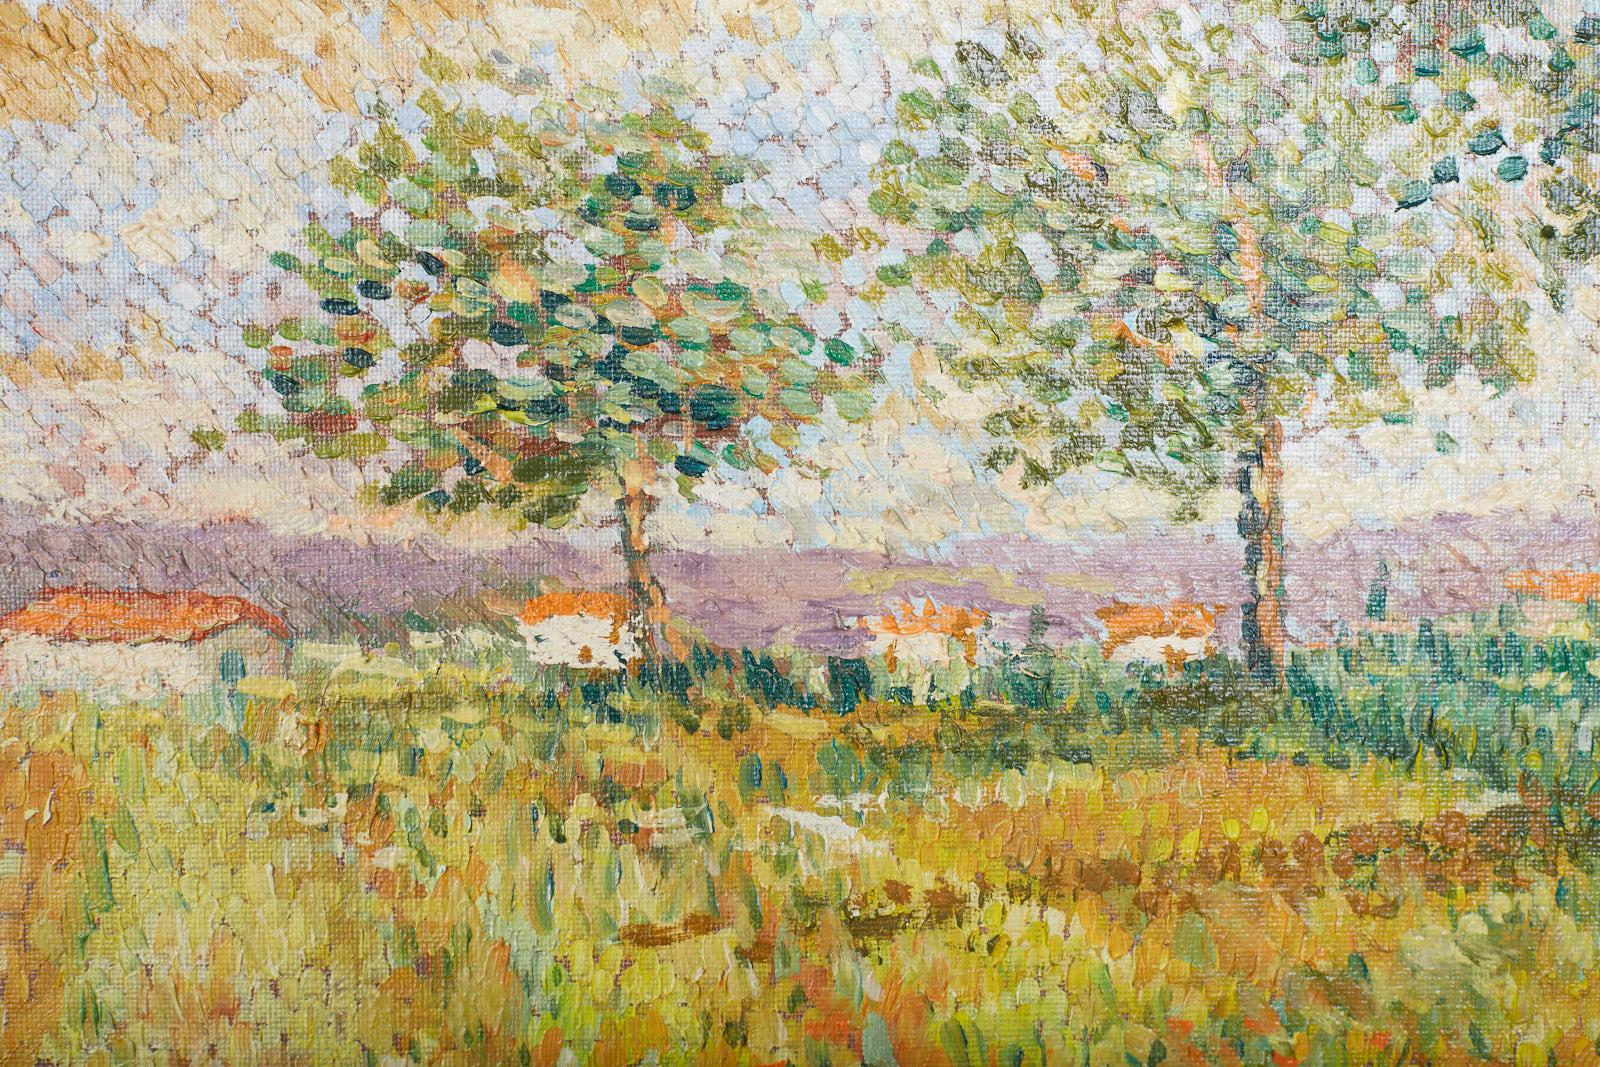 Gorgeous oil on canvas painting by Lucia Fortuny (b. 1937 Italian/French) titled Champ de Blé or wheat fields depicting an idyllic French landscape in a pointillism impressionist style she is known for. Signed lower right and set in a carved and